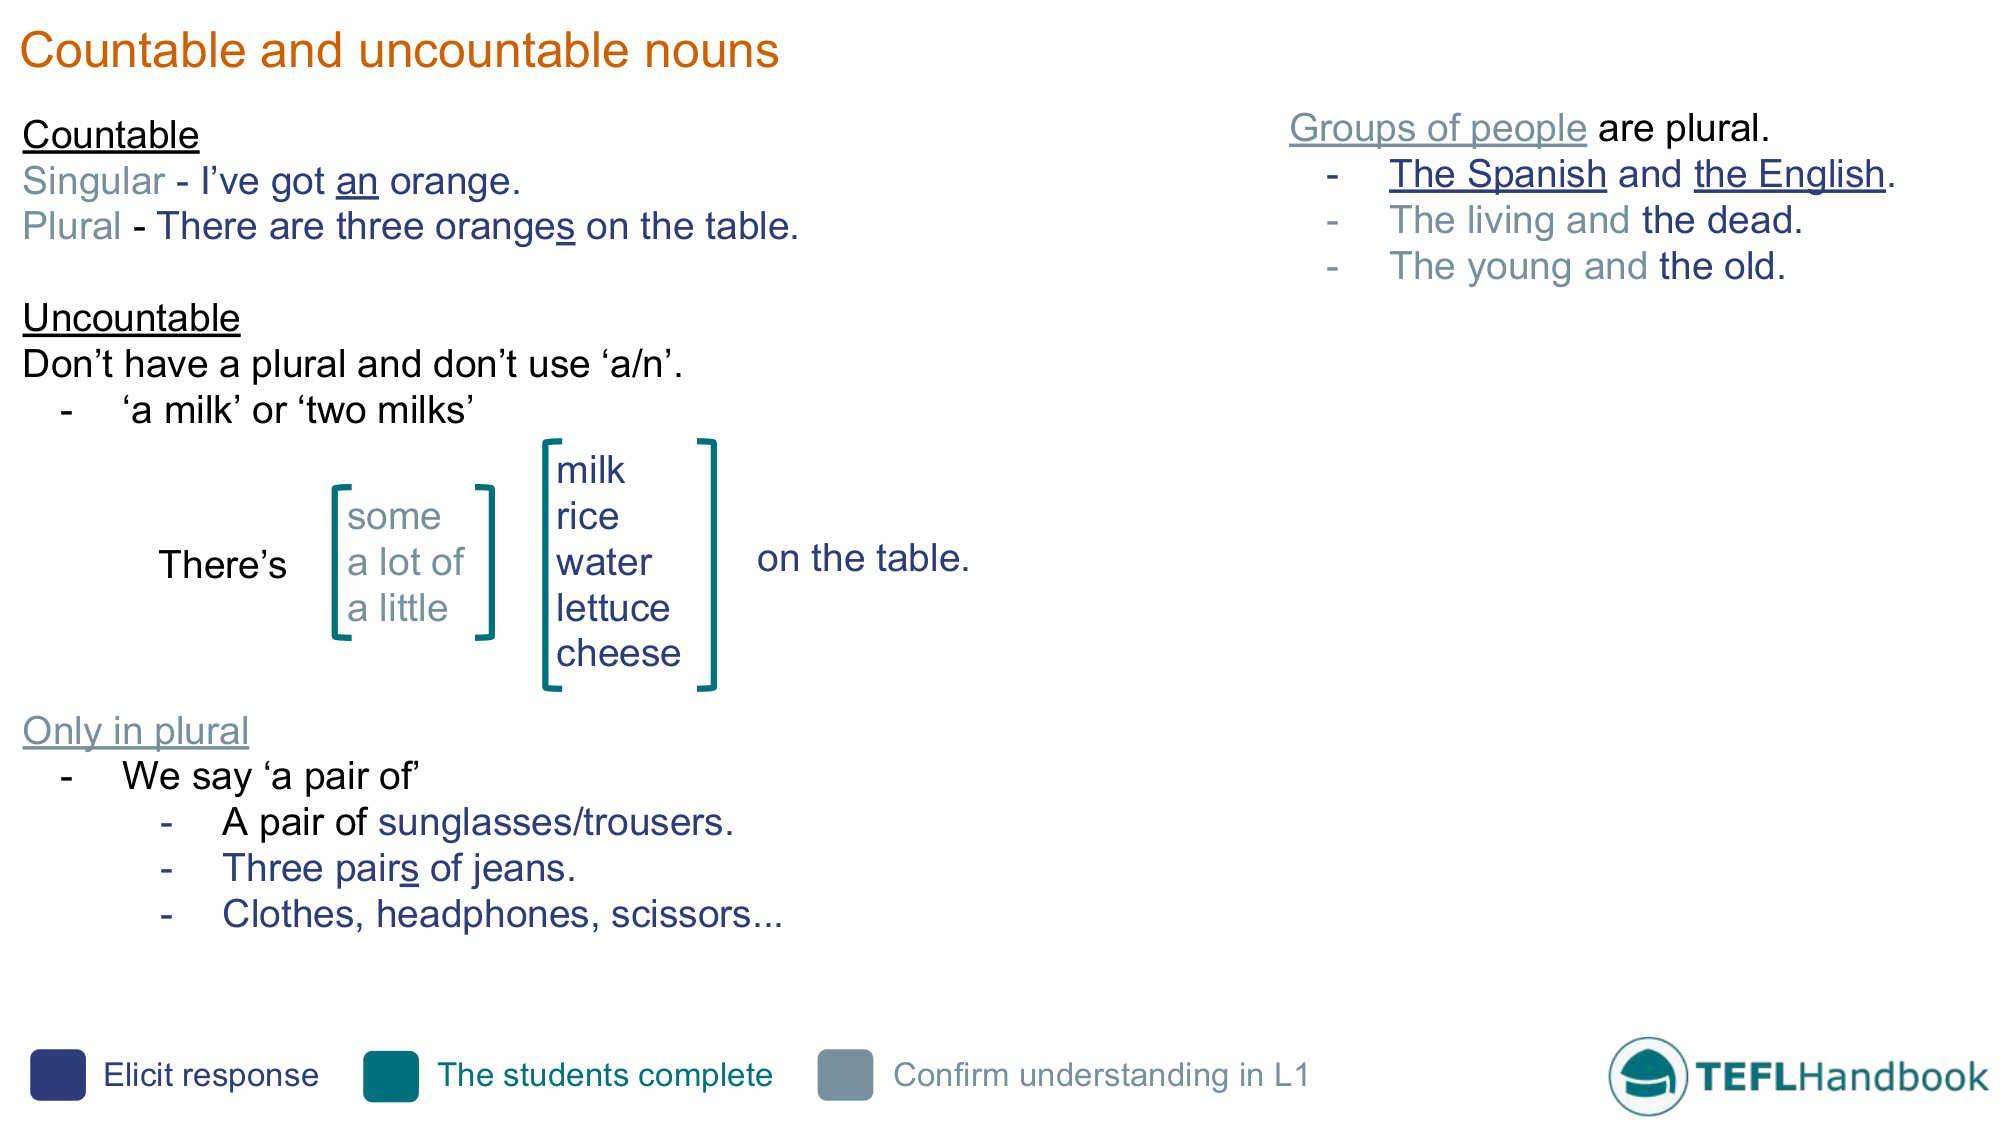 Countable and uncountable nouns fun activities